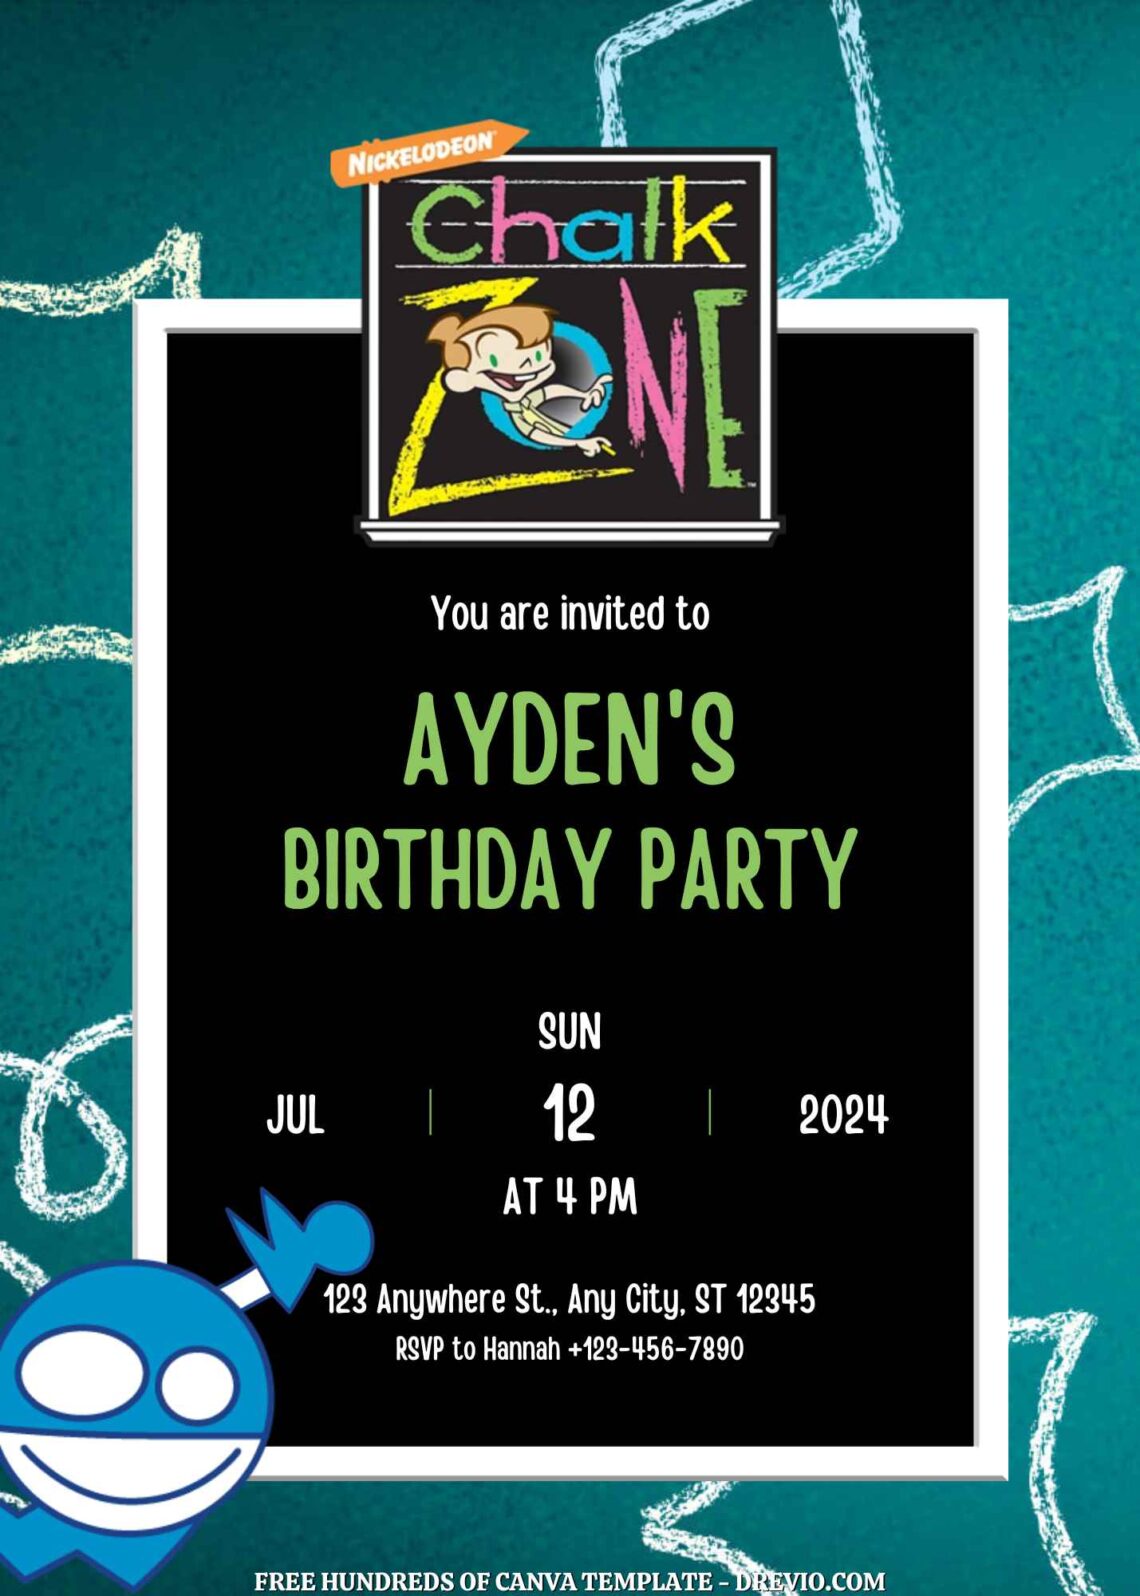 Free ChalkZone Birthday Invitation Templates with Board in the Background